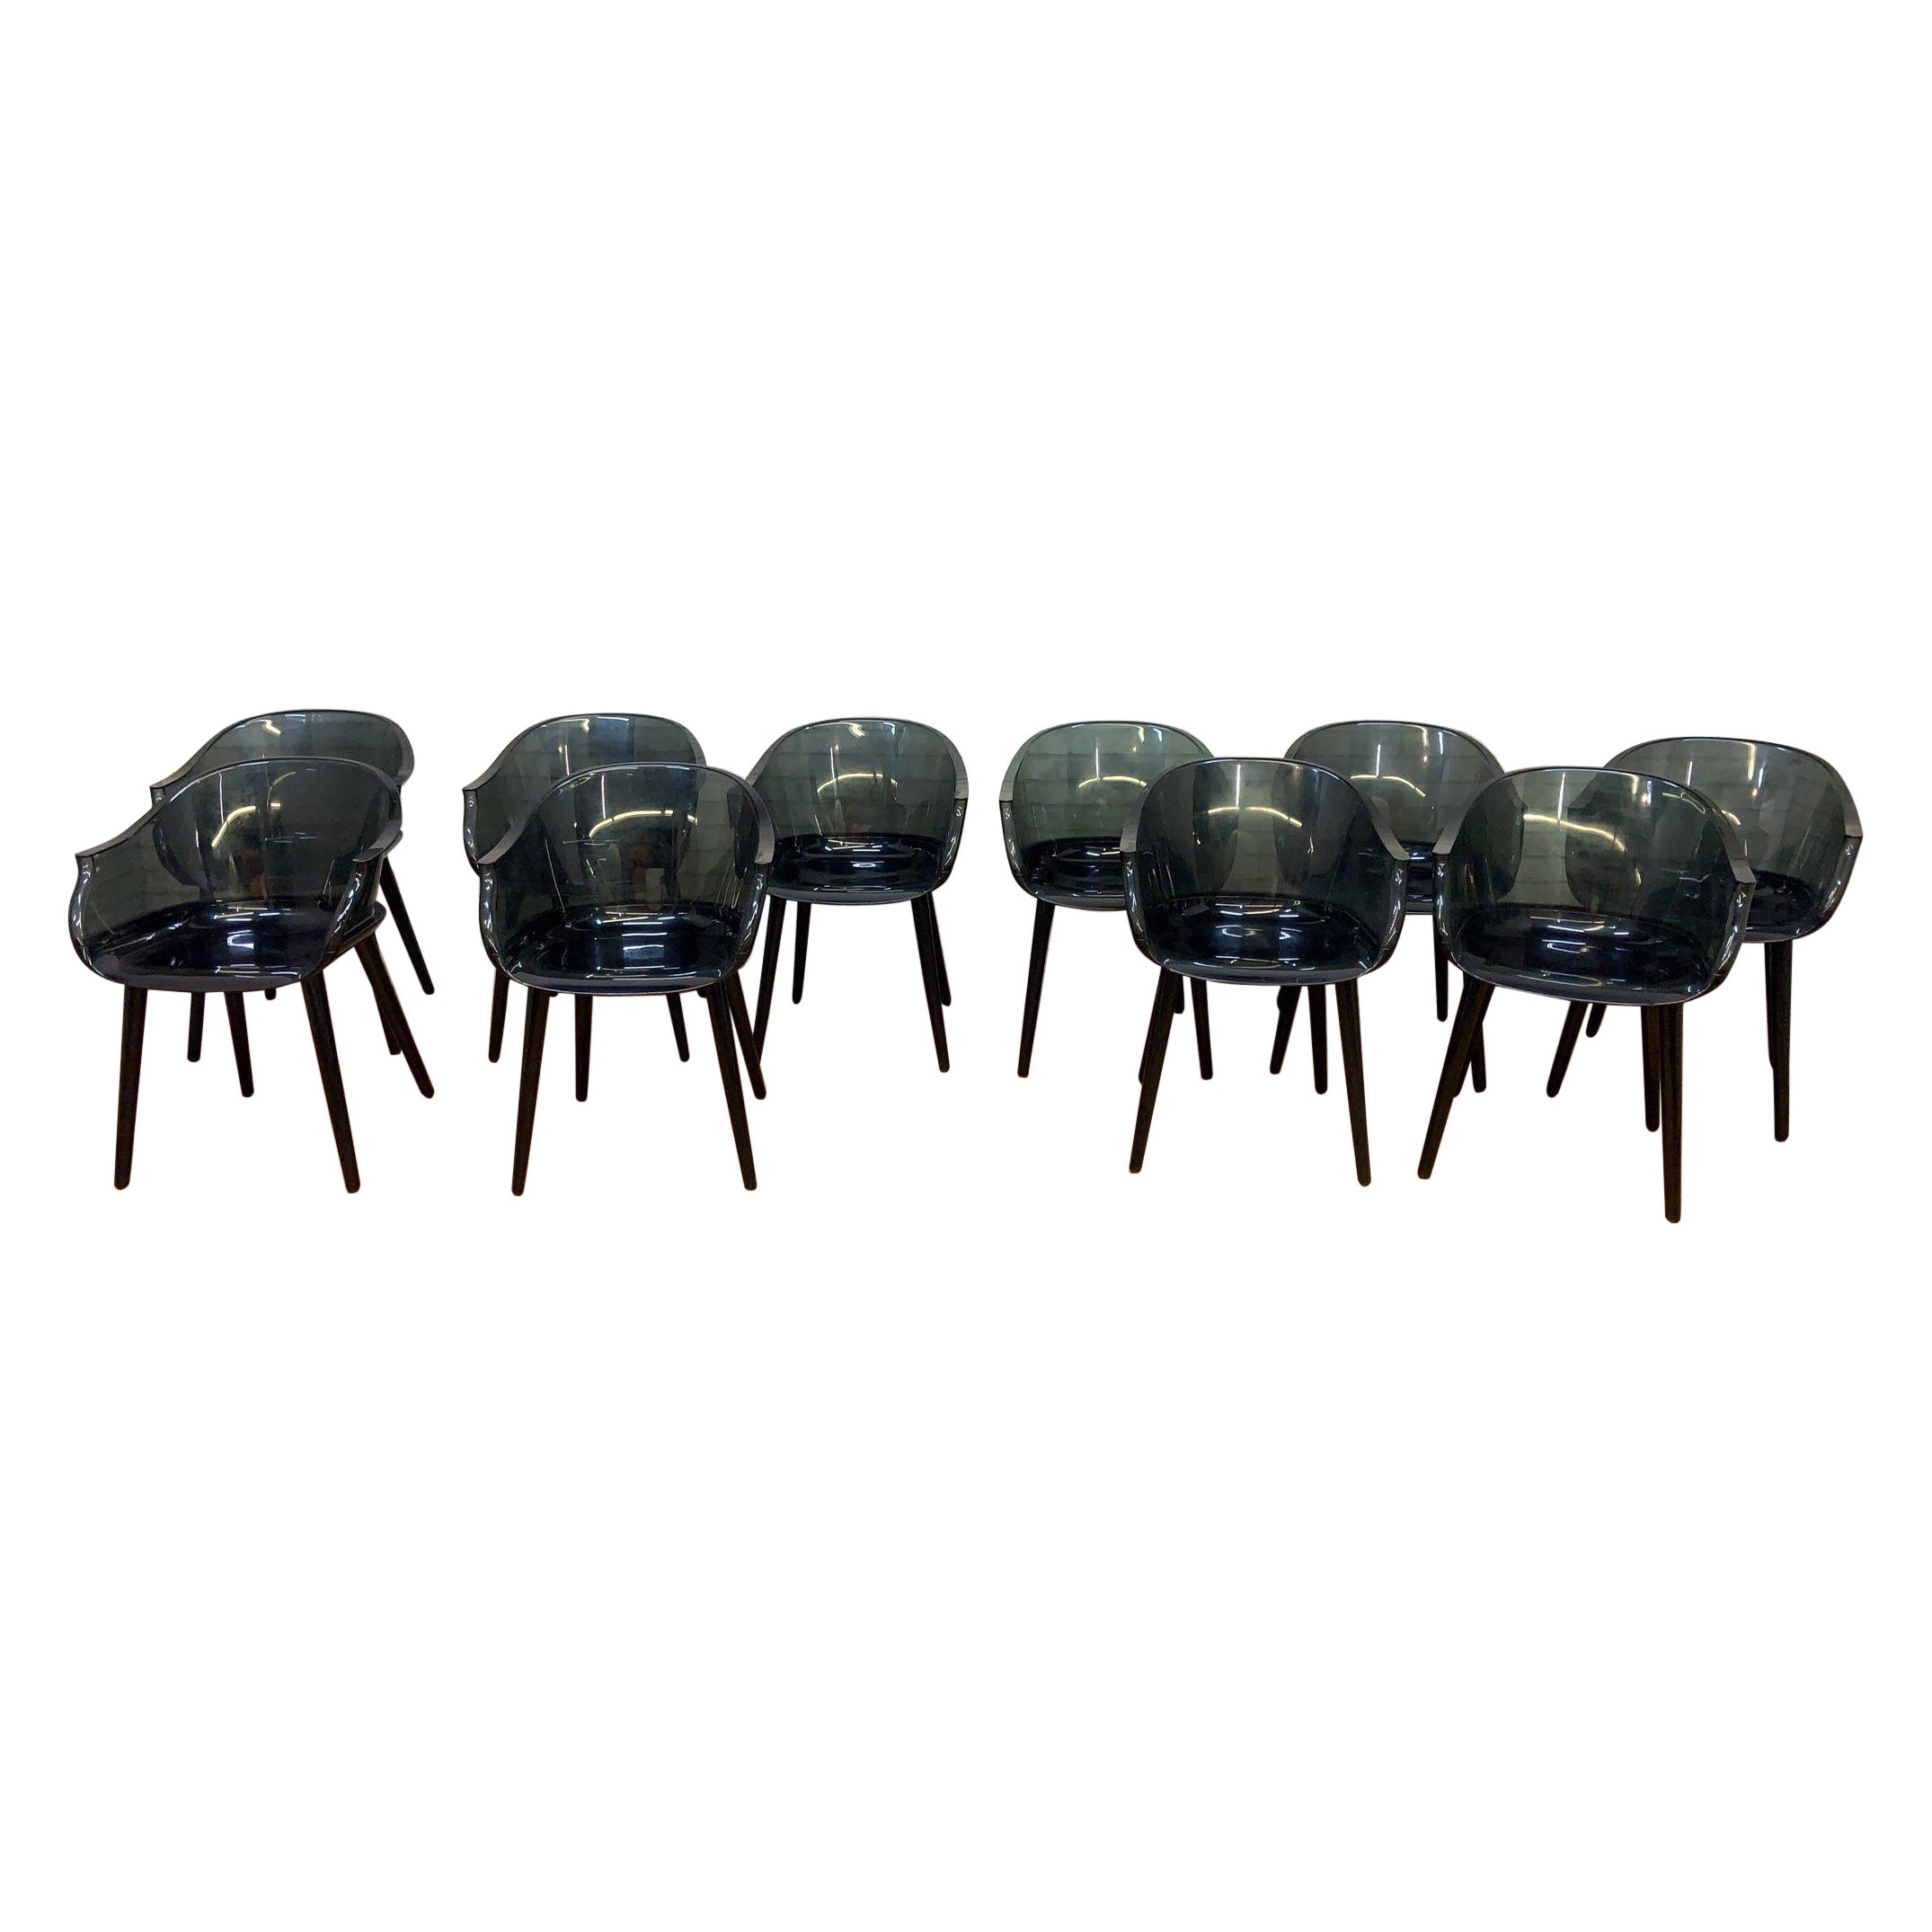 Modern Smoked Cyborg Armchair by Marcel Wanders for Magis Italy - Set of 10